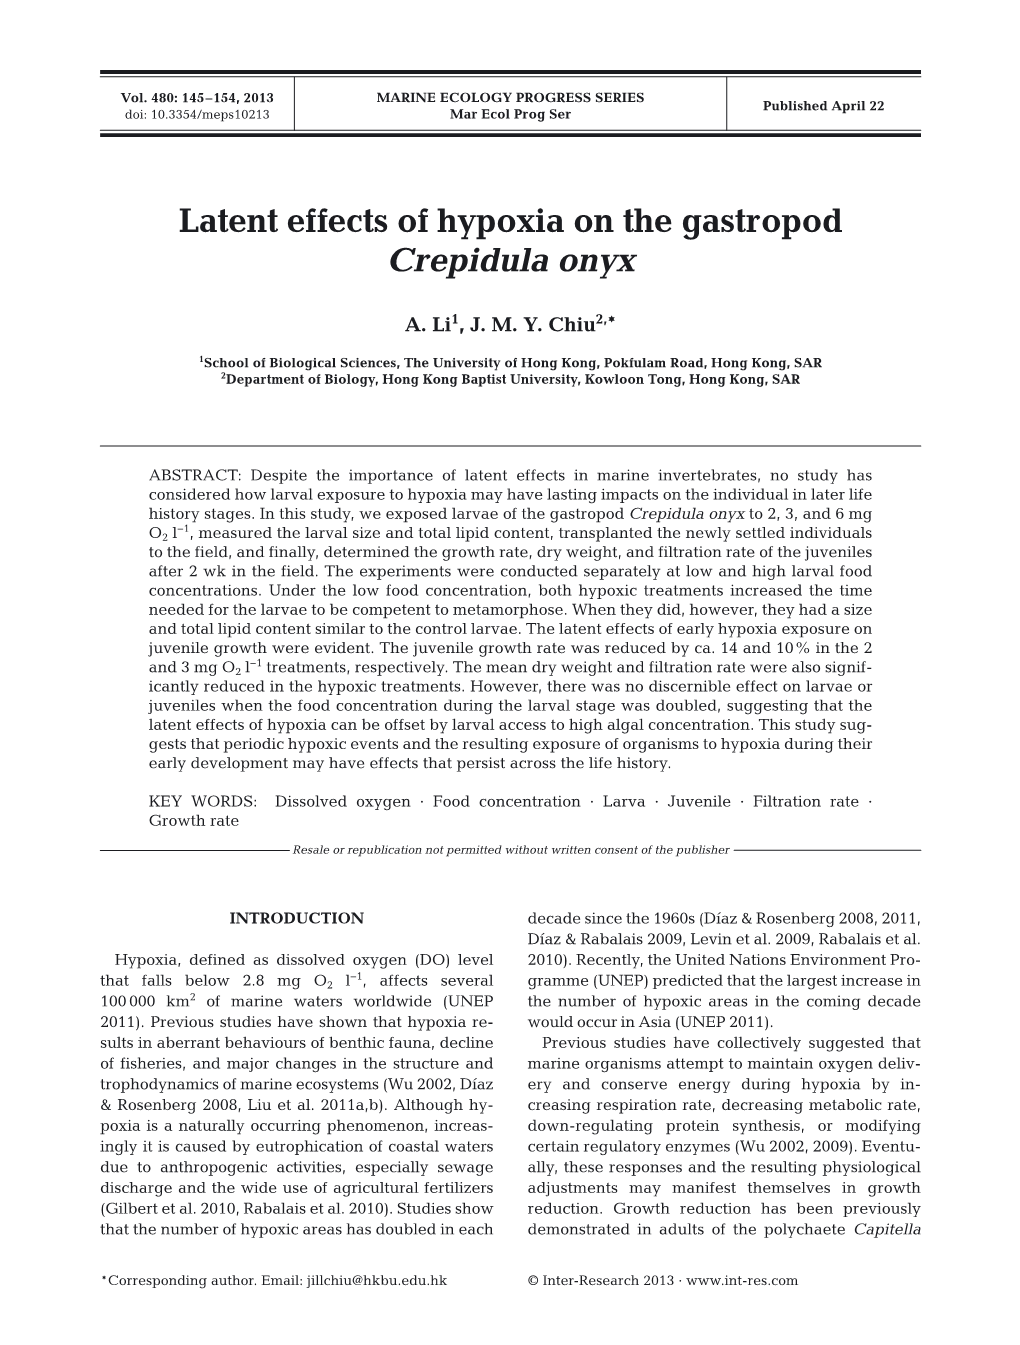 Latent Effects of Hypoxia on the Gastropod Crepidula Onyx